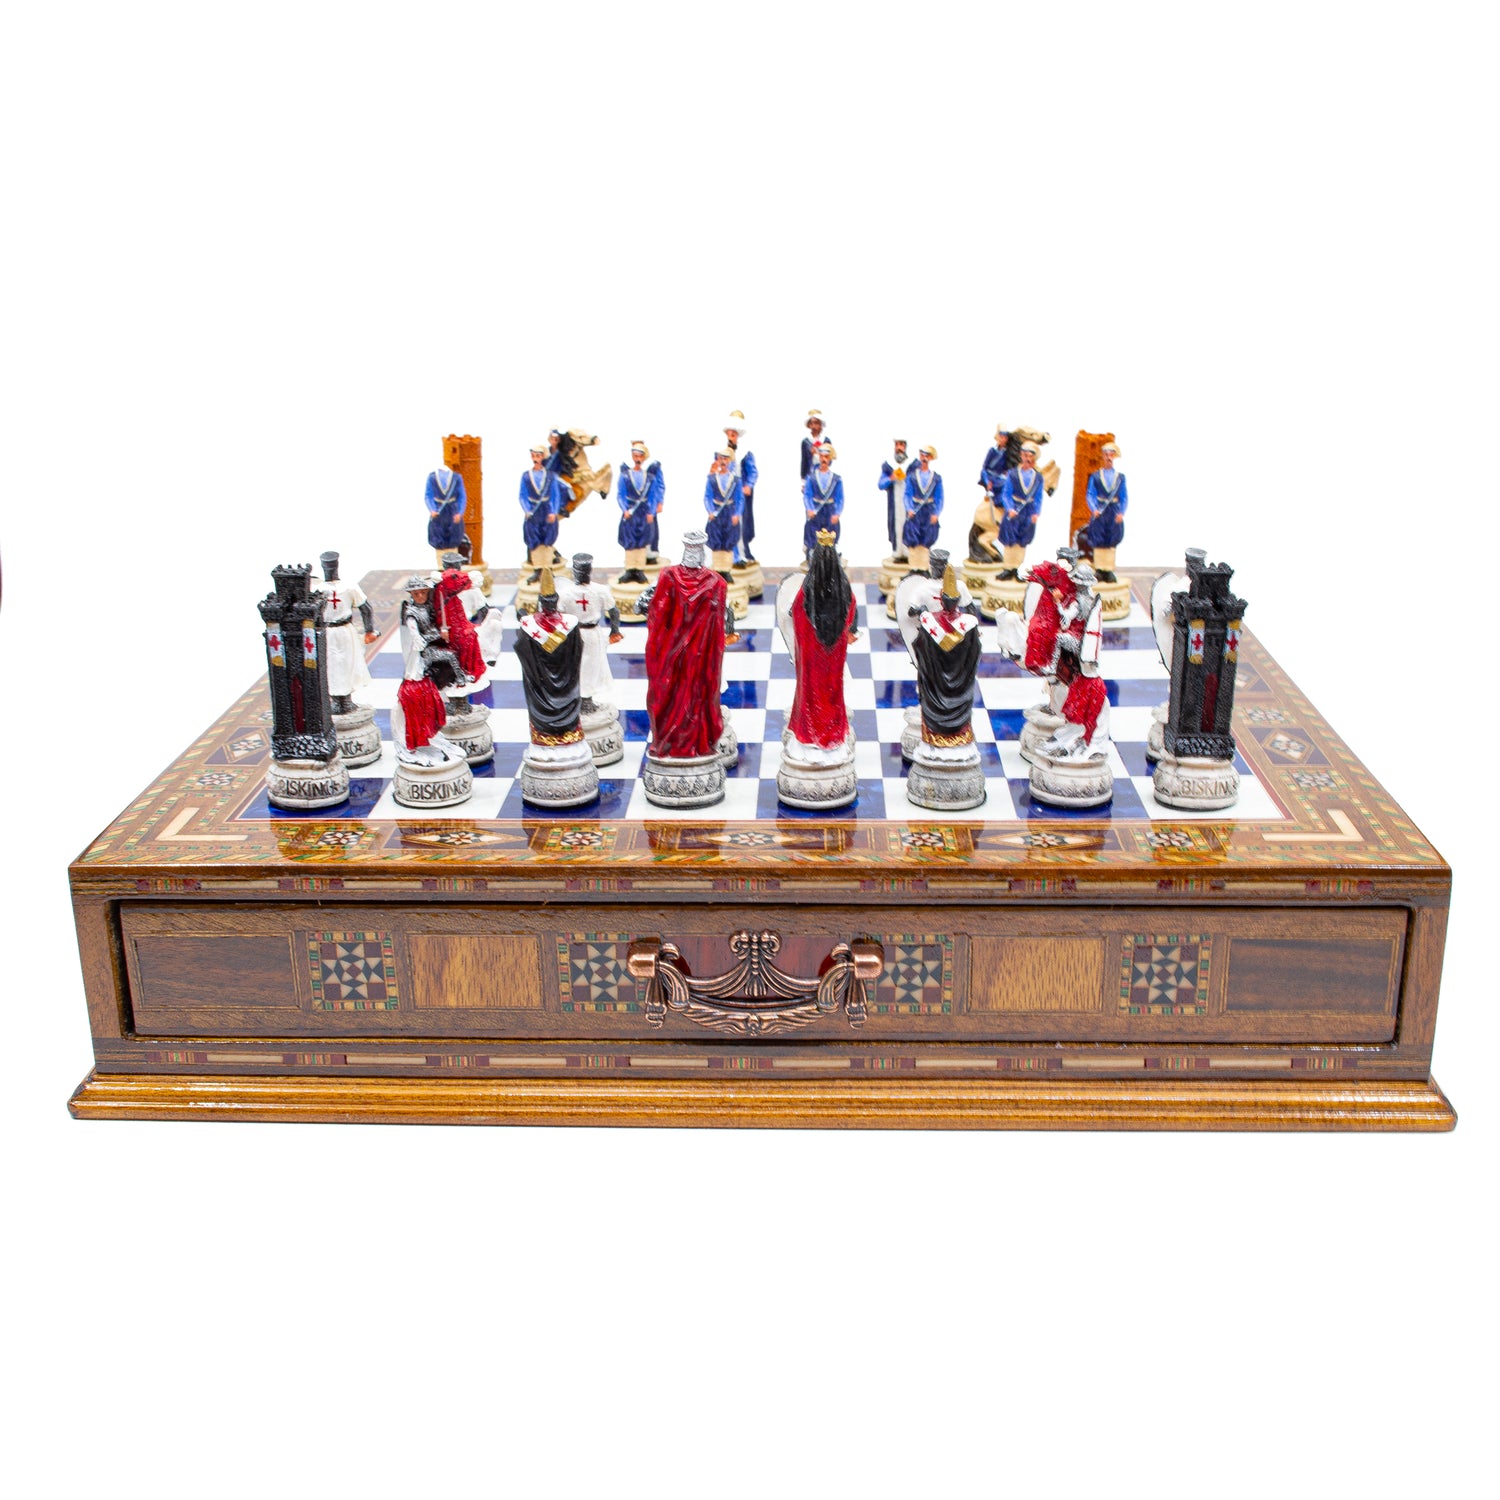 Crusaders vs. Ottoman Chess: Unique with Drawer - Ketohandcraft